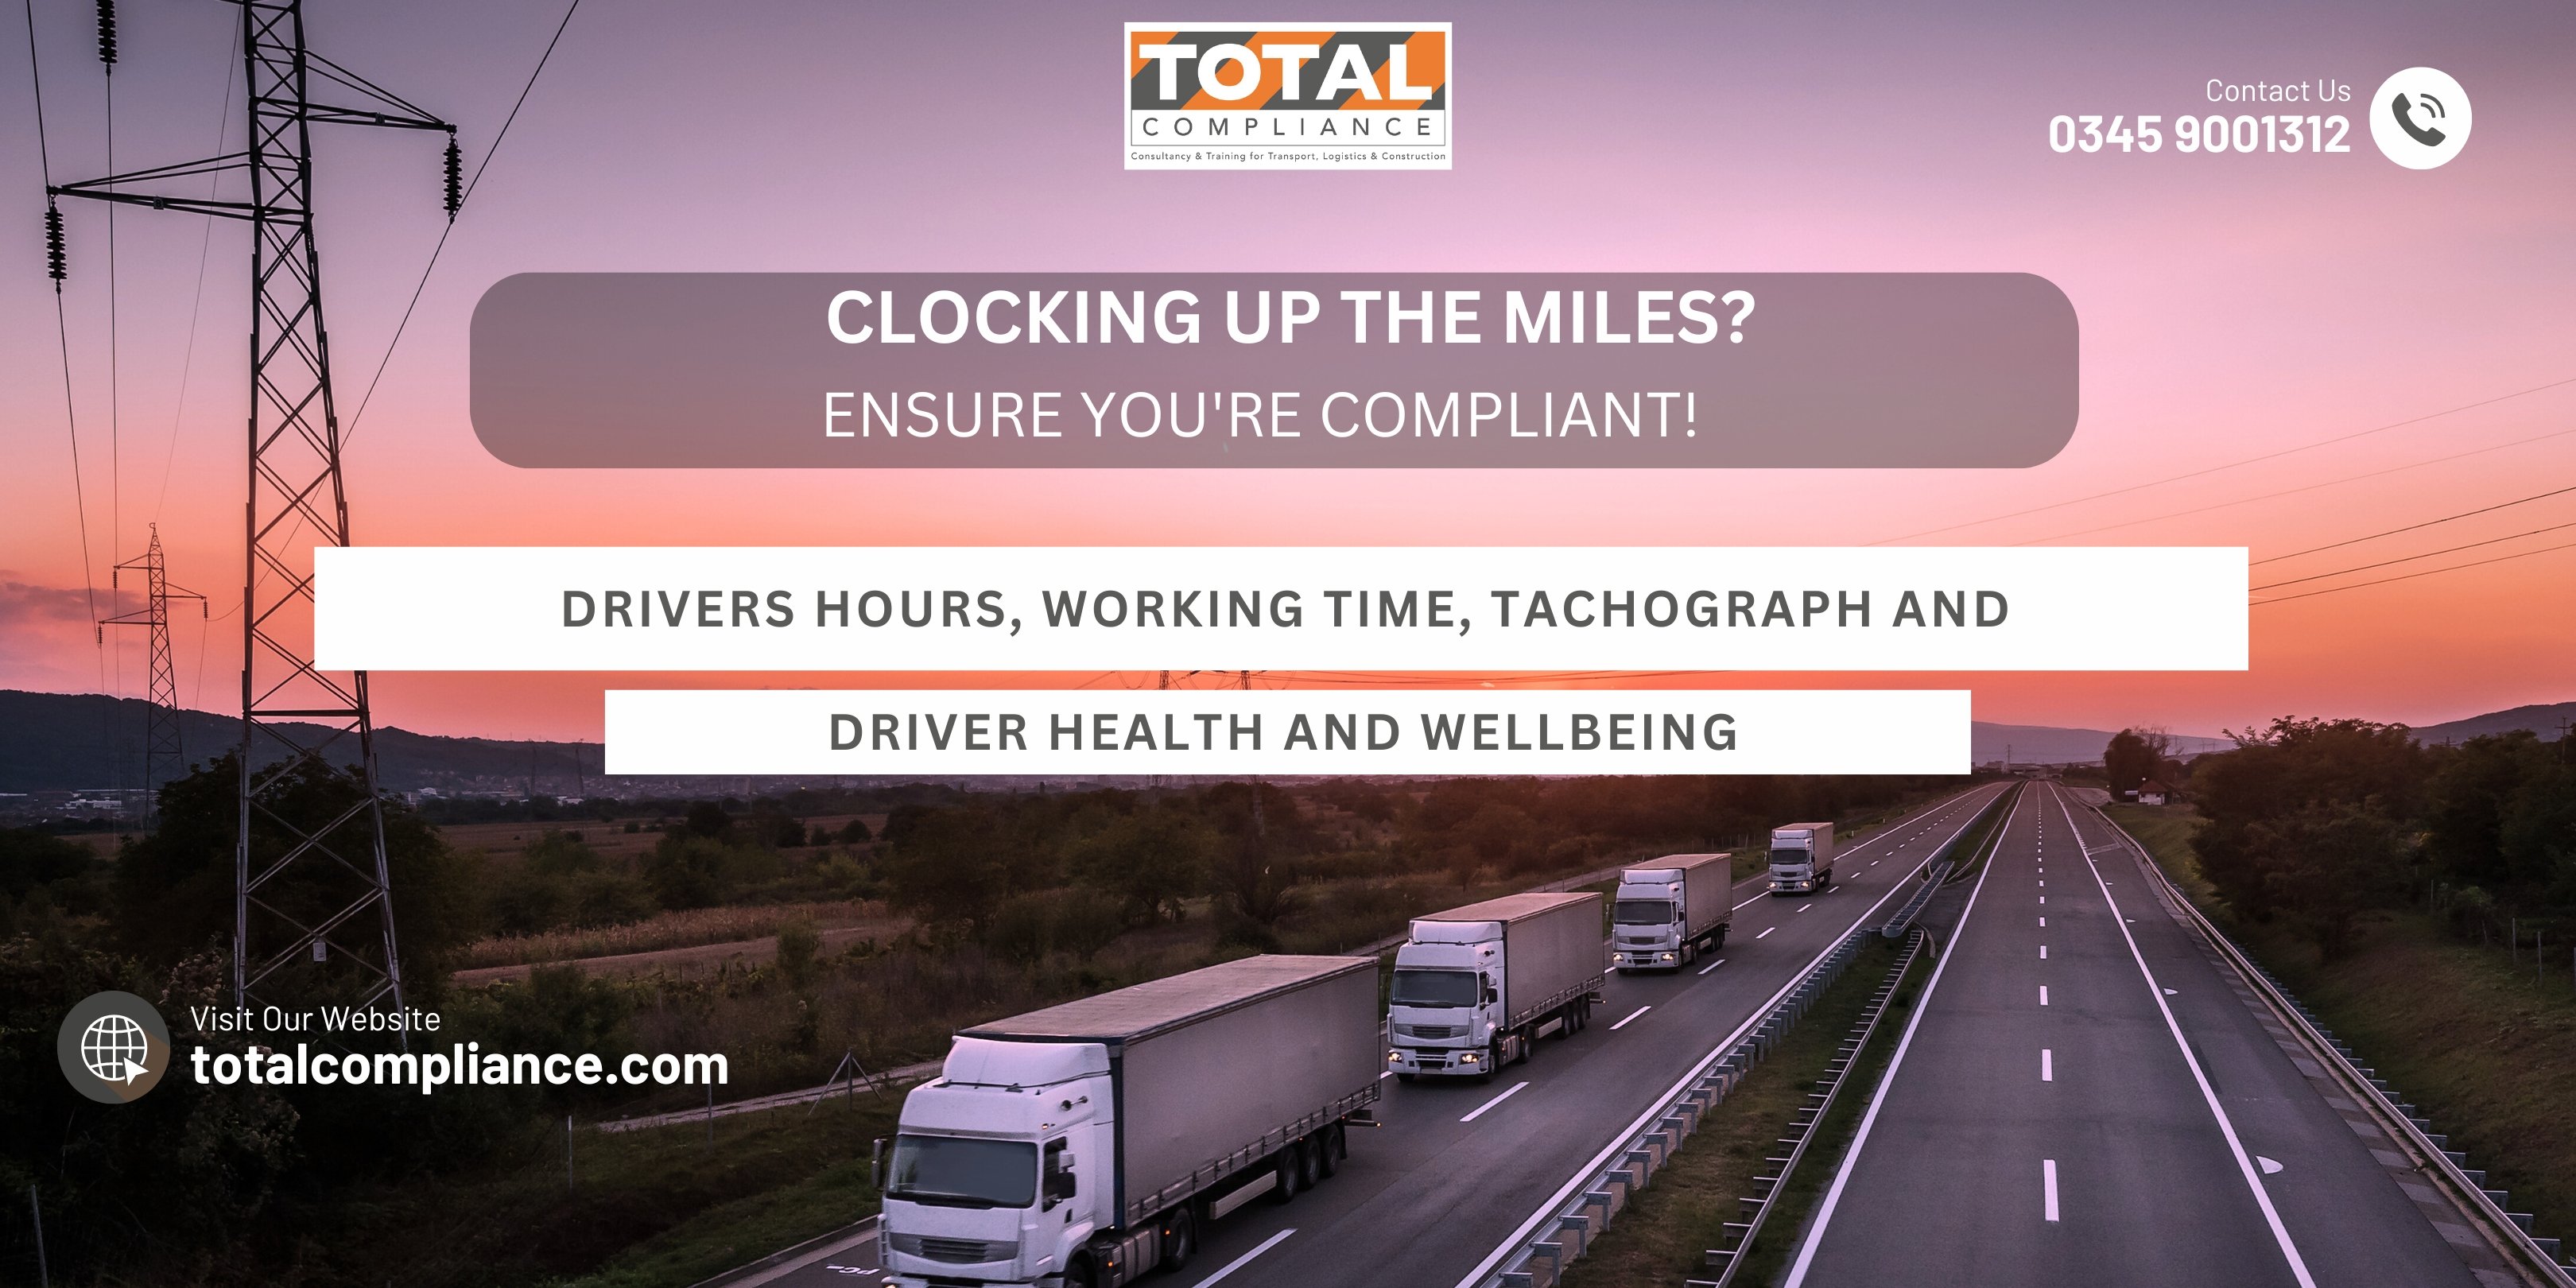 Driver CPC - 1 Day Periodic 7 Hour Course/ Drivers Hours, Working Time, Tachograph and Driver Health and Wellbeing